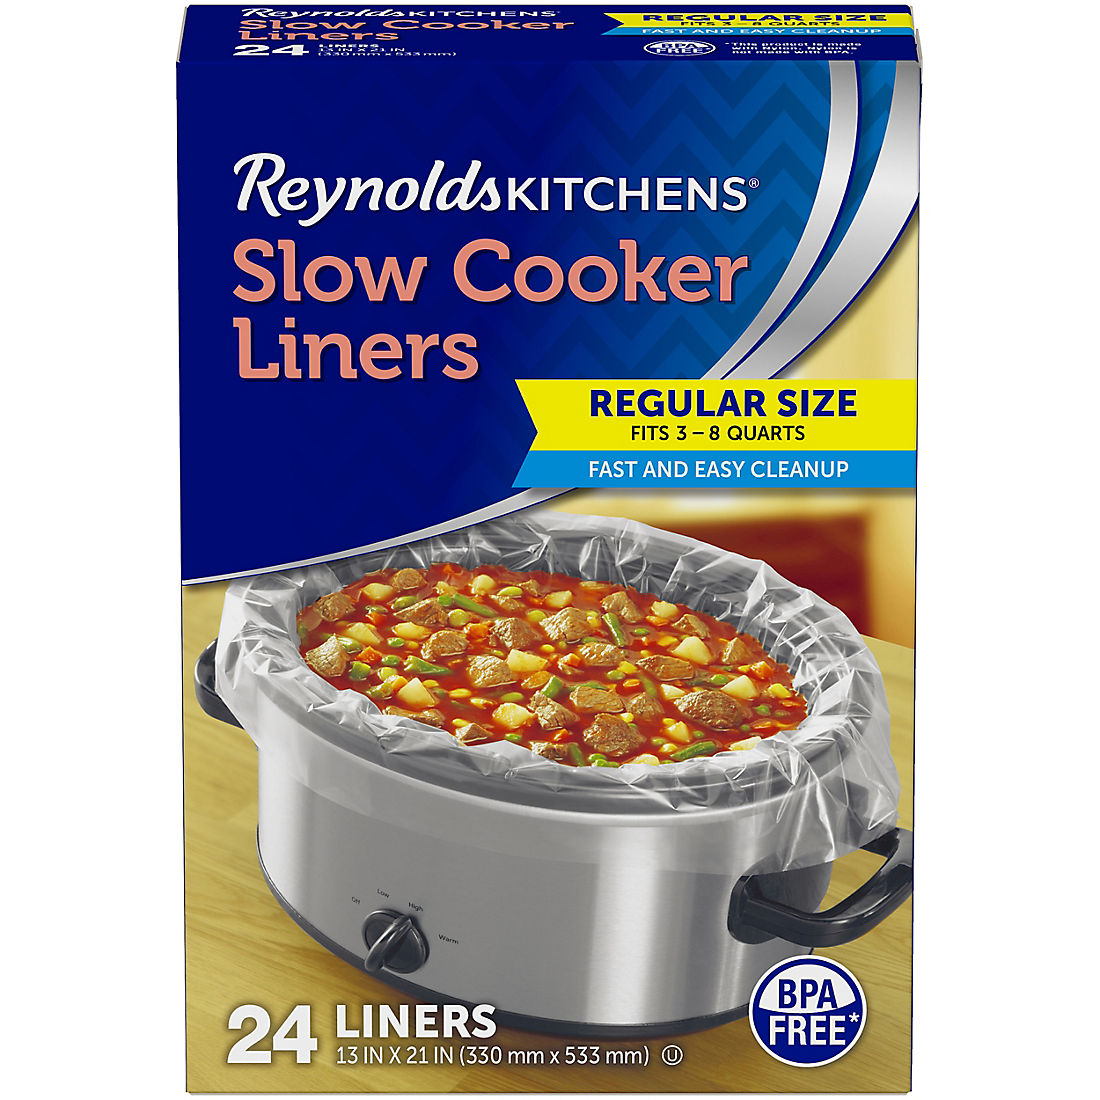 PREMIUM BRAND Thicker than the leading brand and new smaller box Made in USA 1 box of 8 Kosher OU Cert Western Orange BPA Free! Slow Cooker Crock Pot Liners